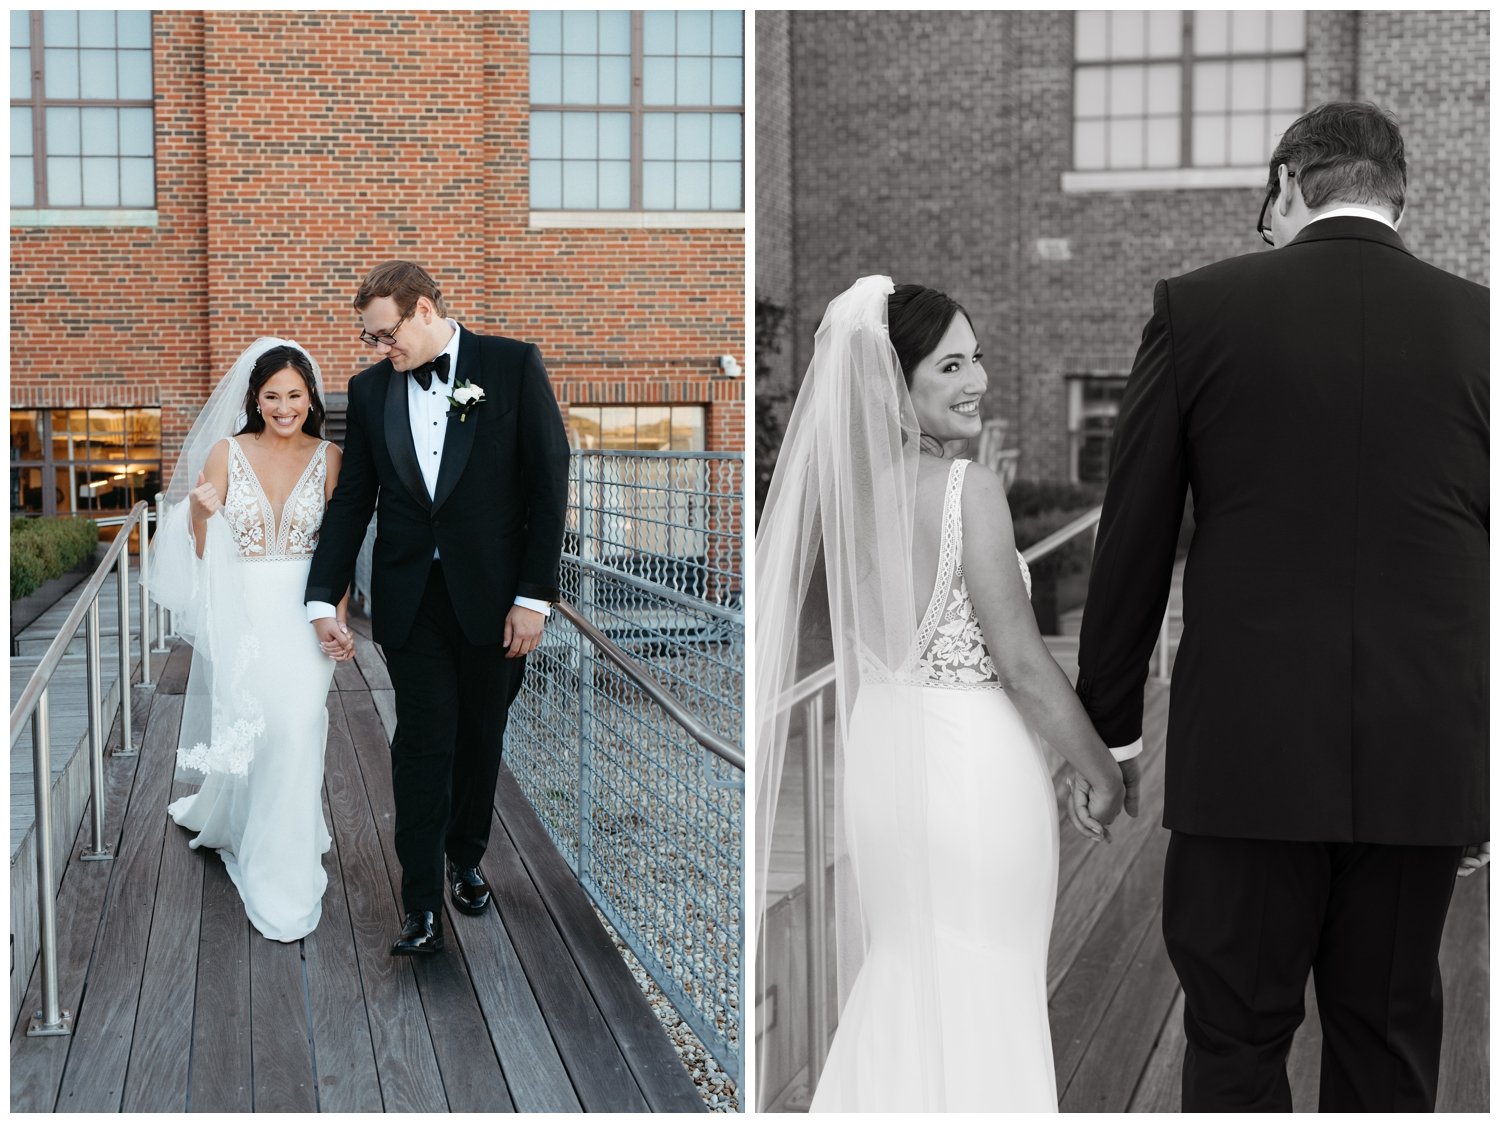 The couple explores the Roof at Ponce City Market before the ceremony